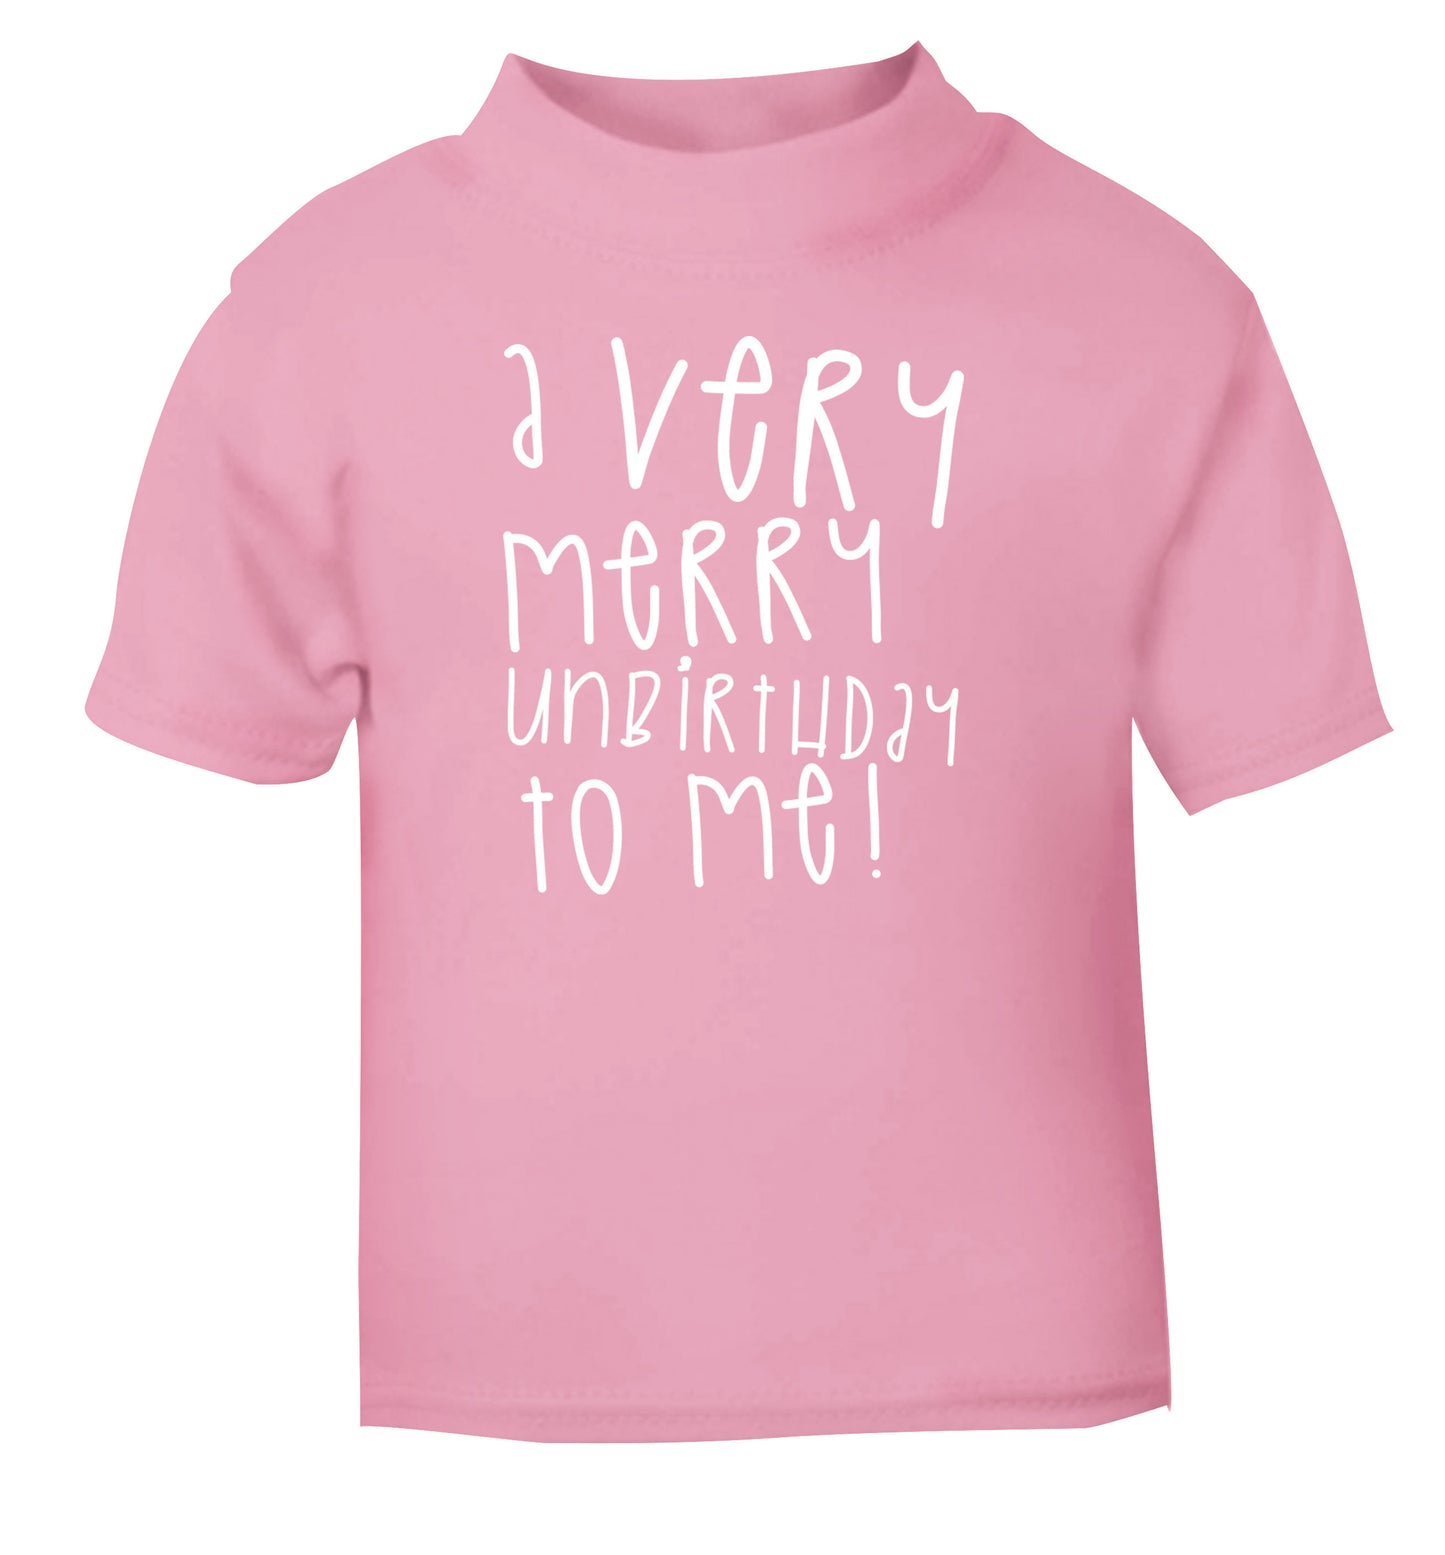 A very merry unbirthday to me! light pink Baby Toddler Tshirt 2 Years